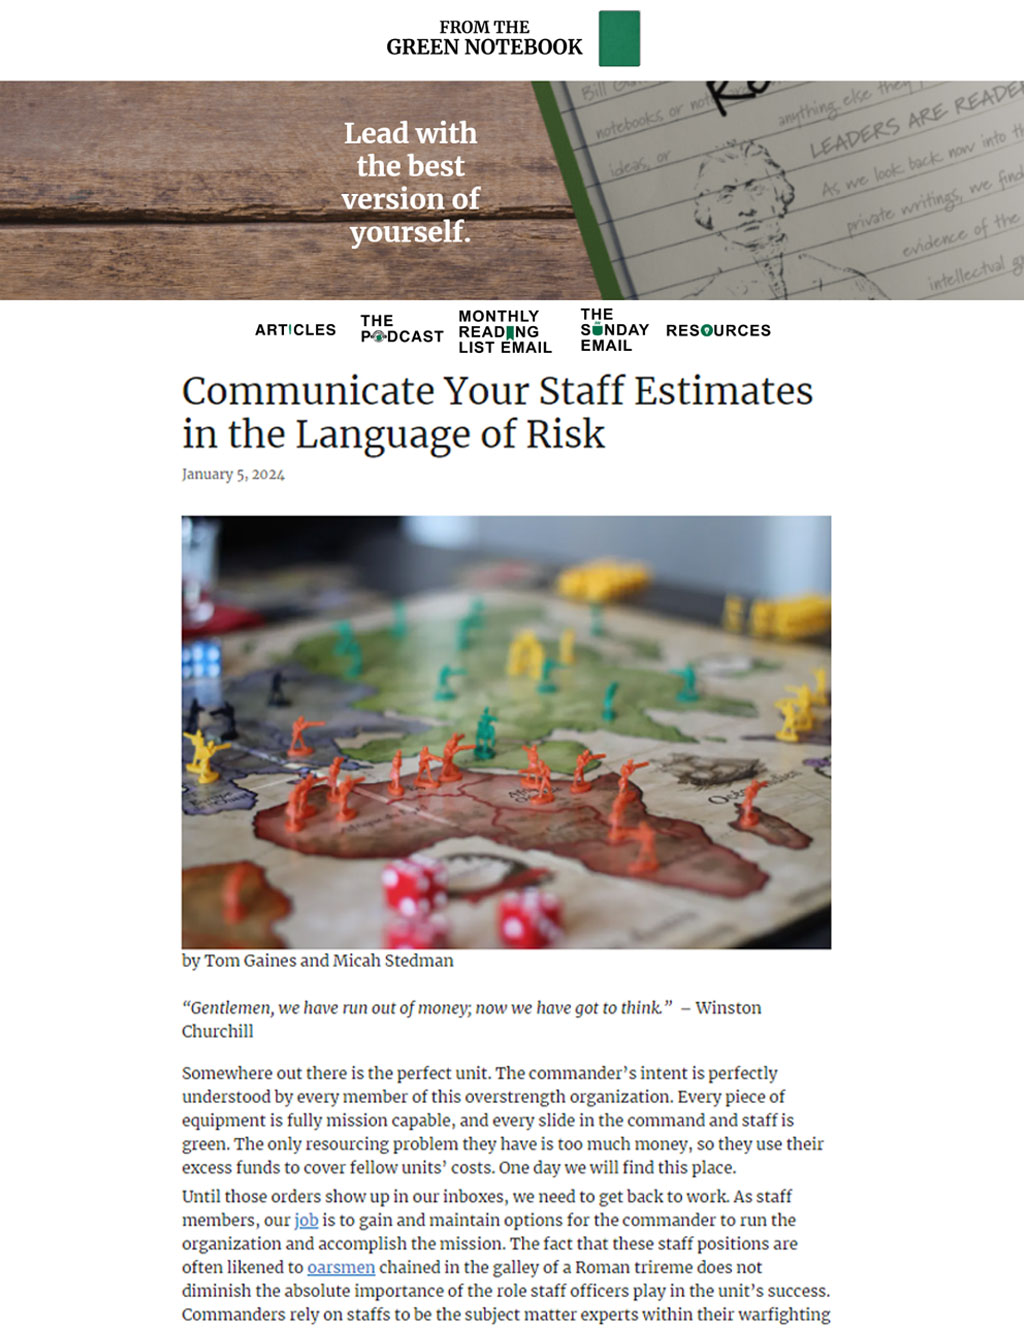 The image is a webpage snapshot titled Communicate Your Staff Estimates in the Language of Risk dated January 5, 2024, with an article excerpt and a photo of a military strategy board game, from The Green Notebook website.